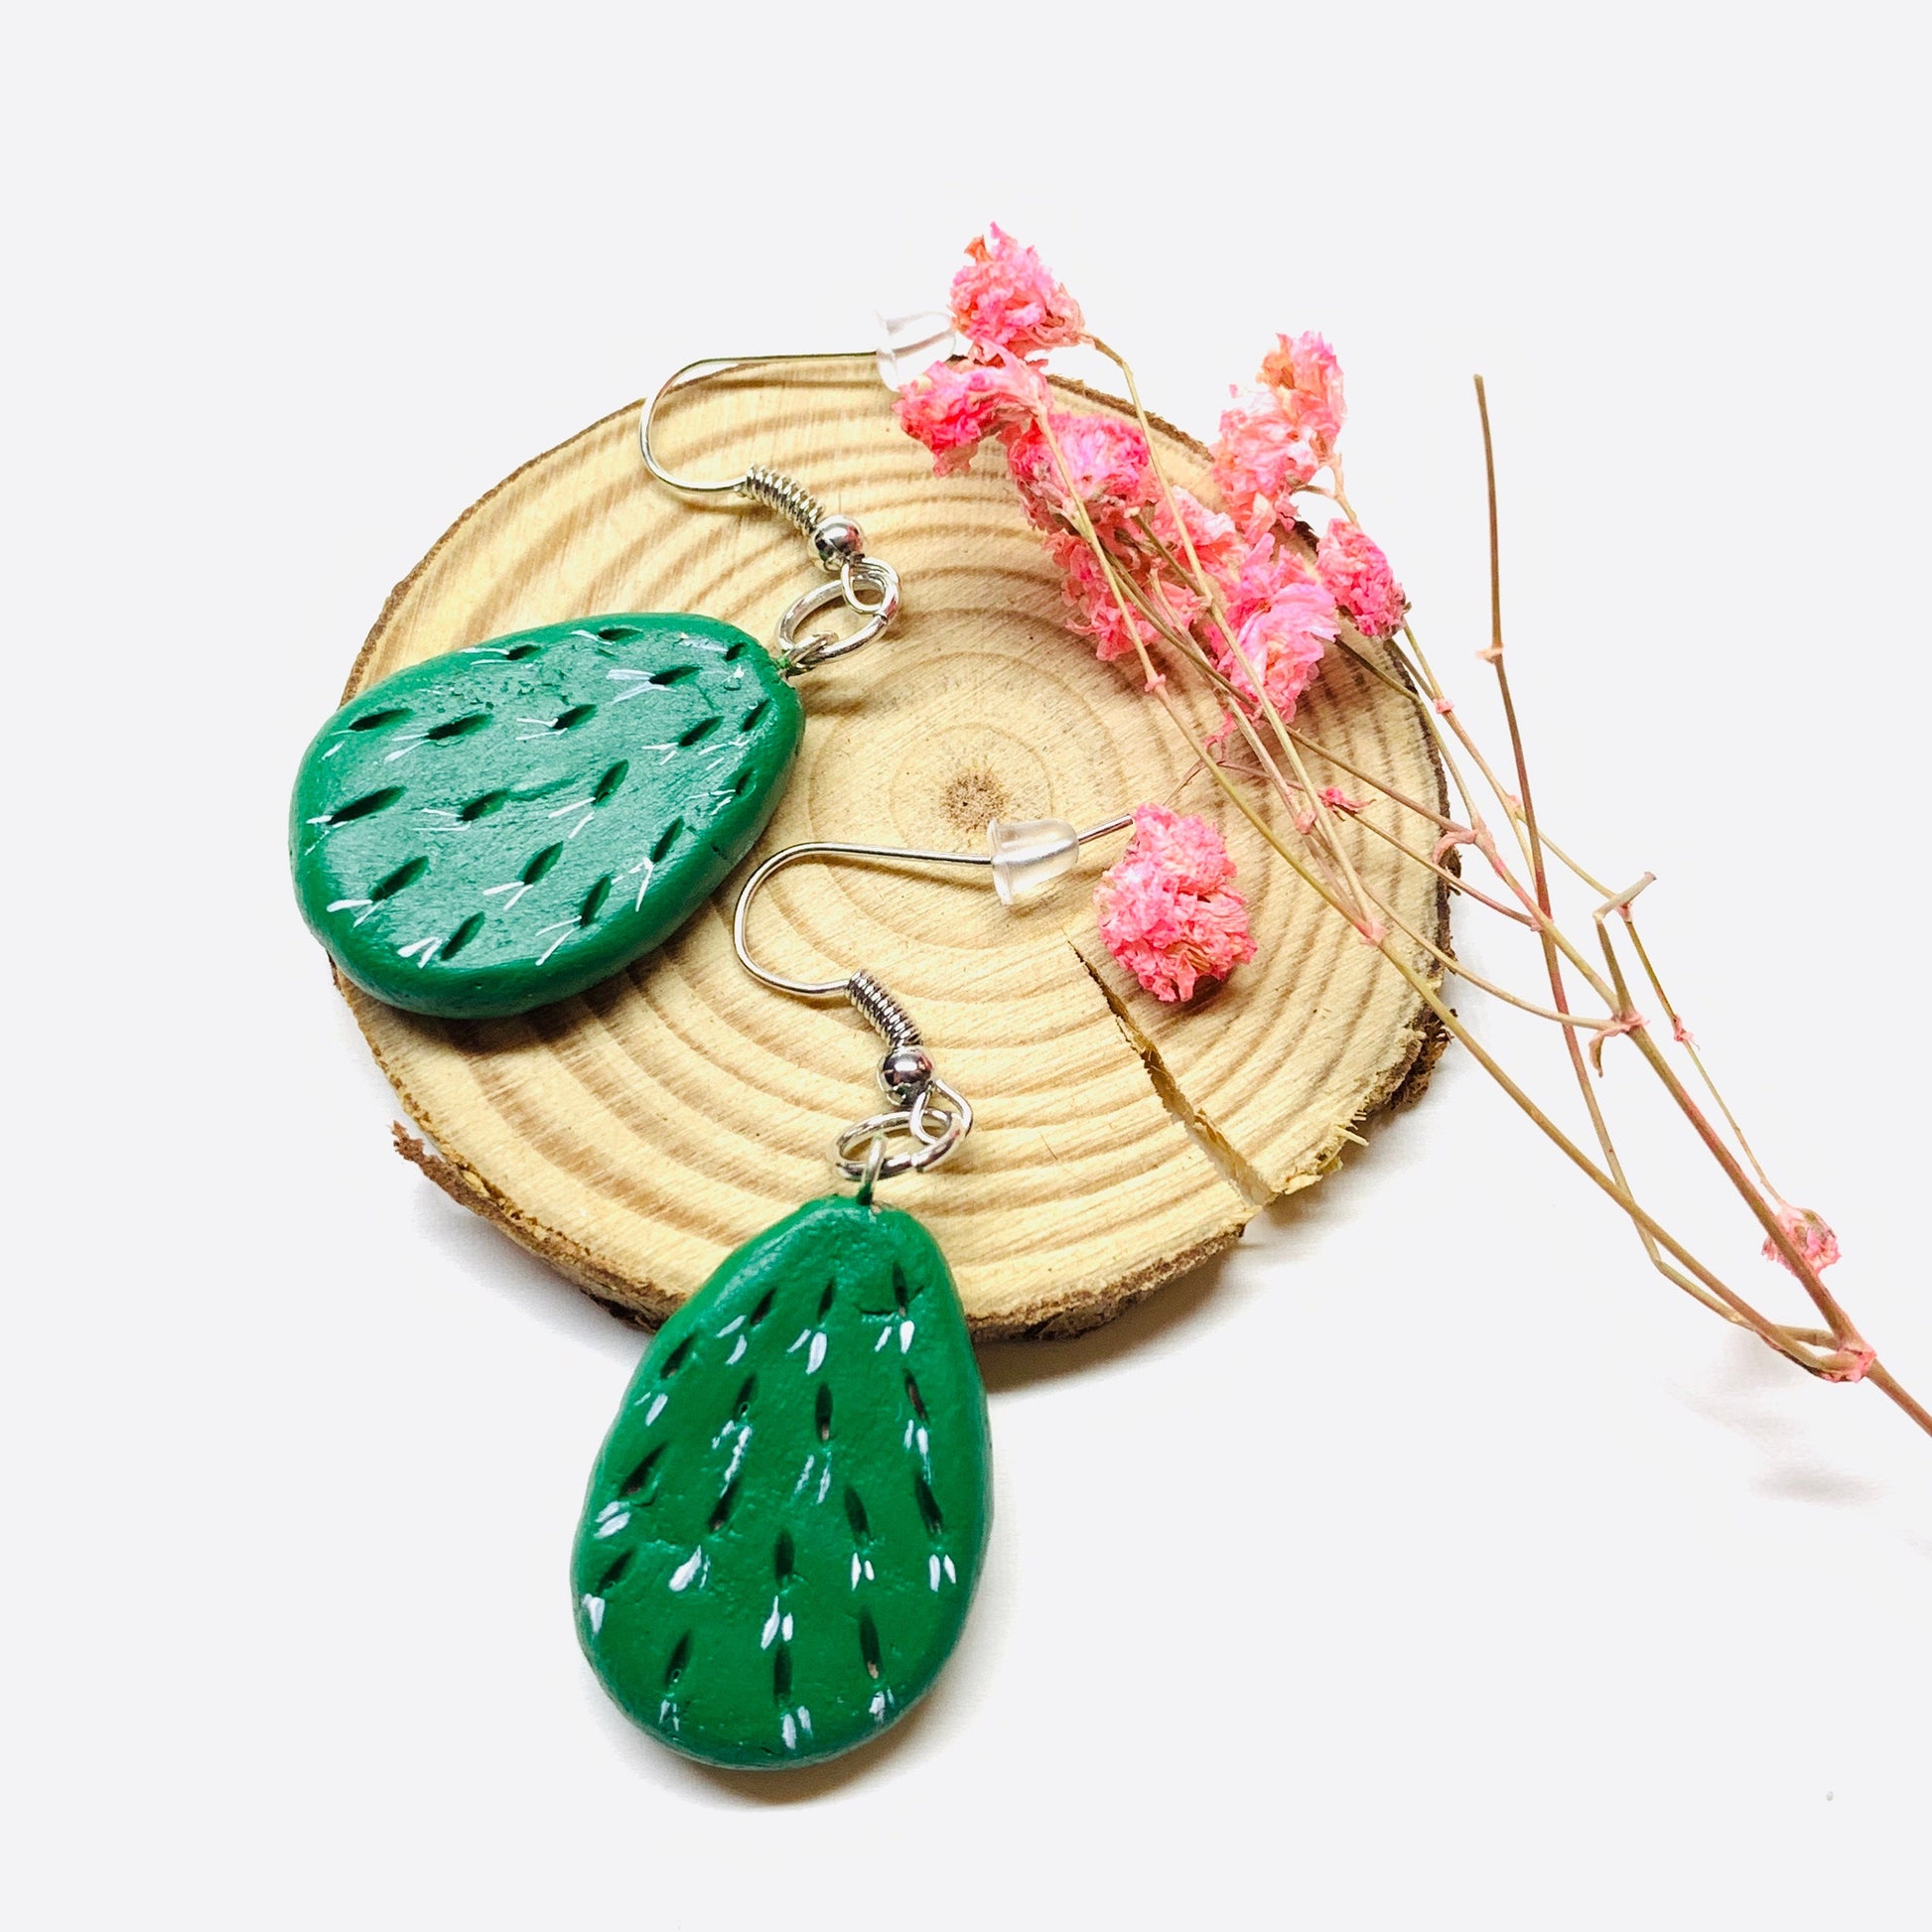 Ethnic Green Cactus Clay Earrings Mexican Folk Art Hand Painted Food Jewelry Nopales Aretes Mexico Artisan Wearable Art Women Girl's Fashion